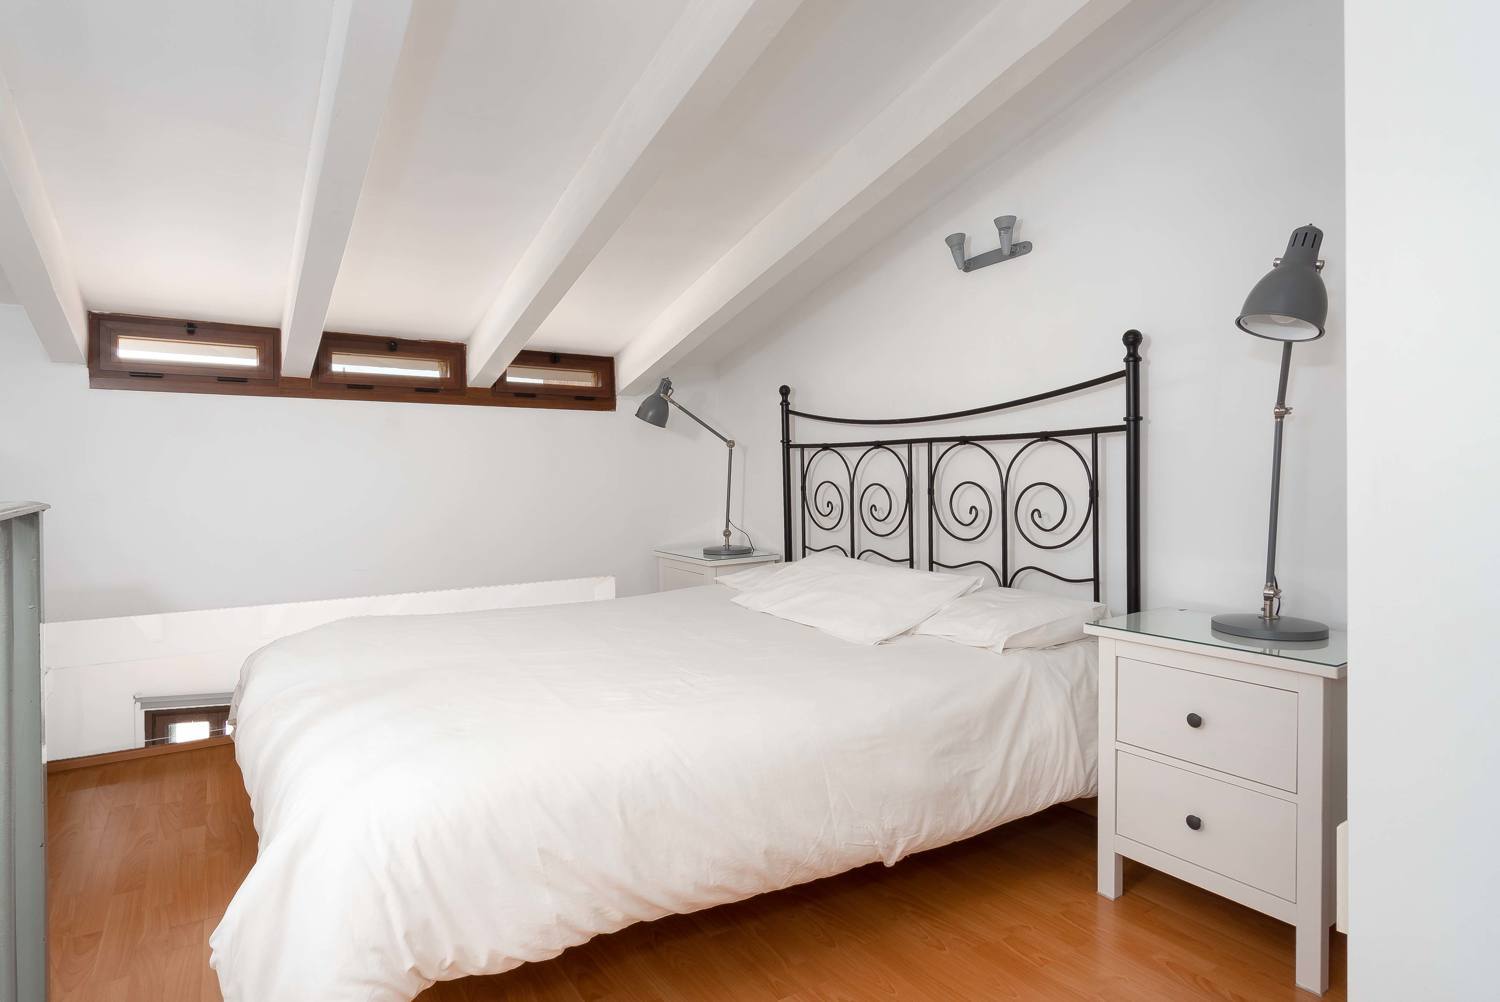 PACK OF 3 BEAUTIFUL APARTMENTS WITH LOFT IN PALMA OLD TOWN